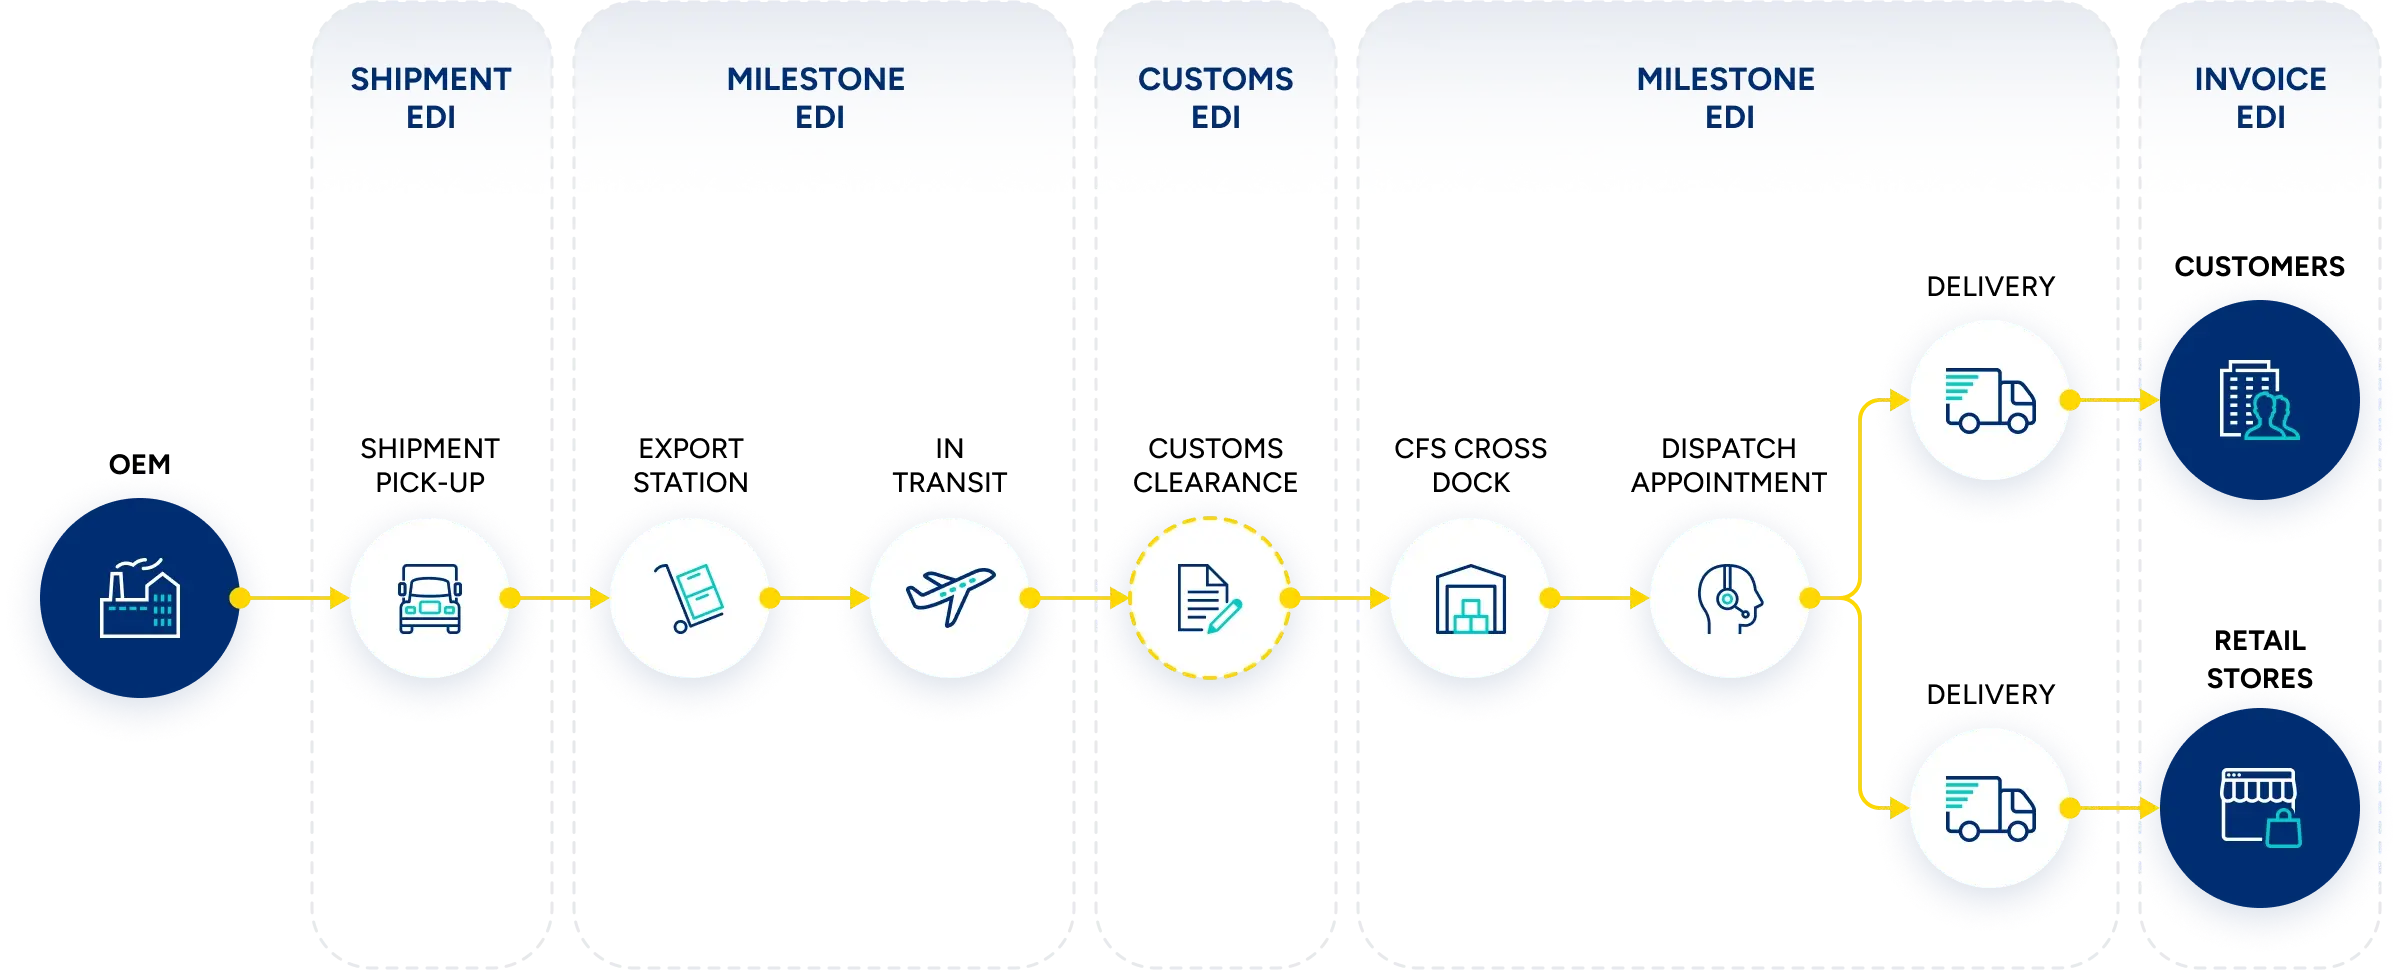 Morrison One platform page for monitoring end-to-end EDI milestones.